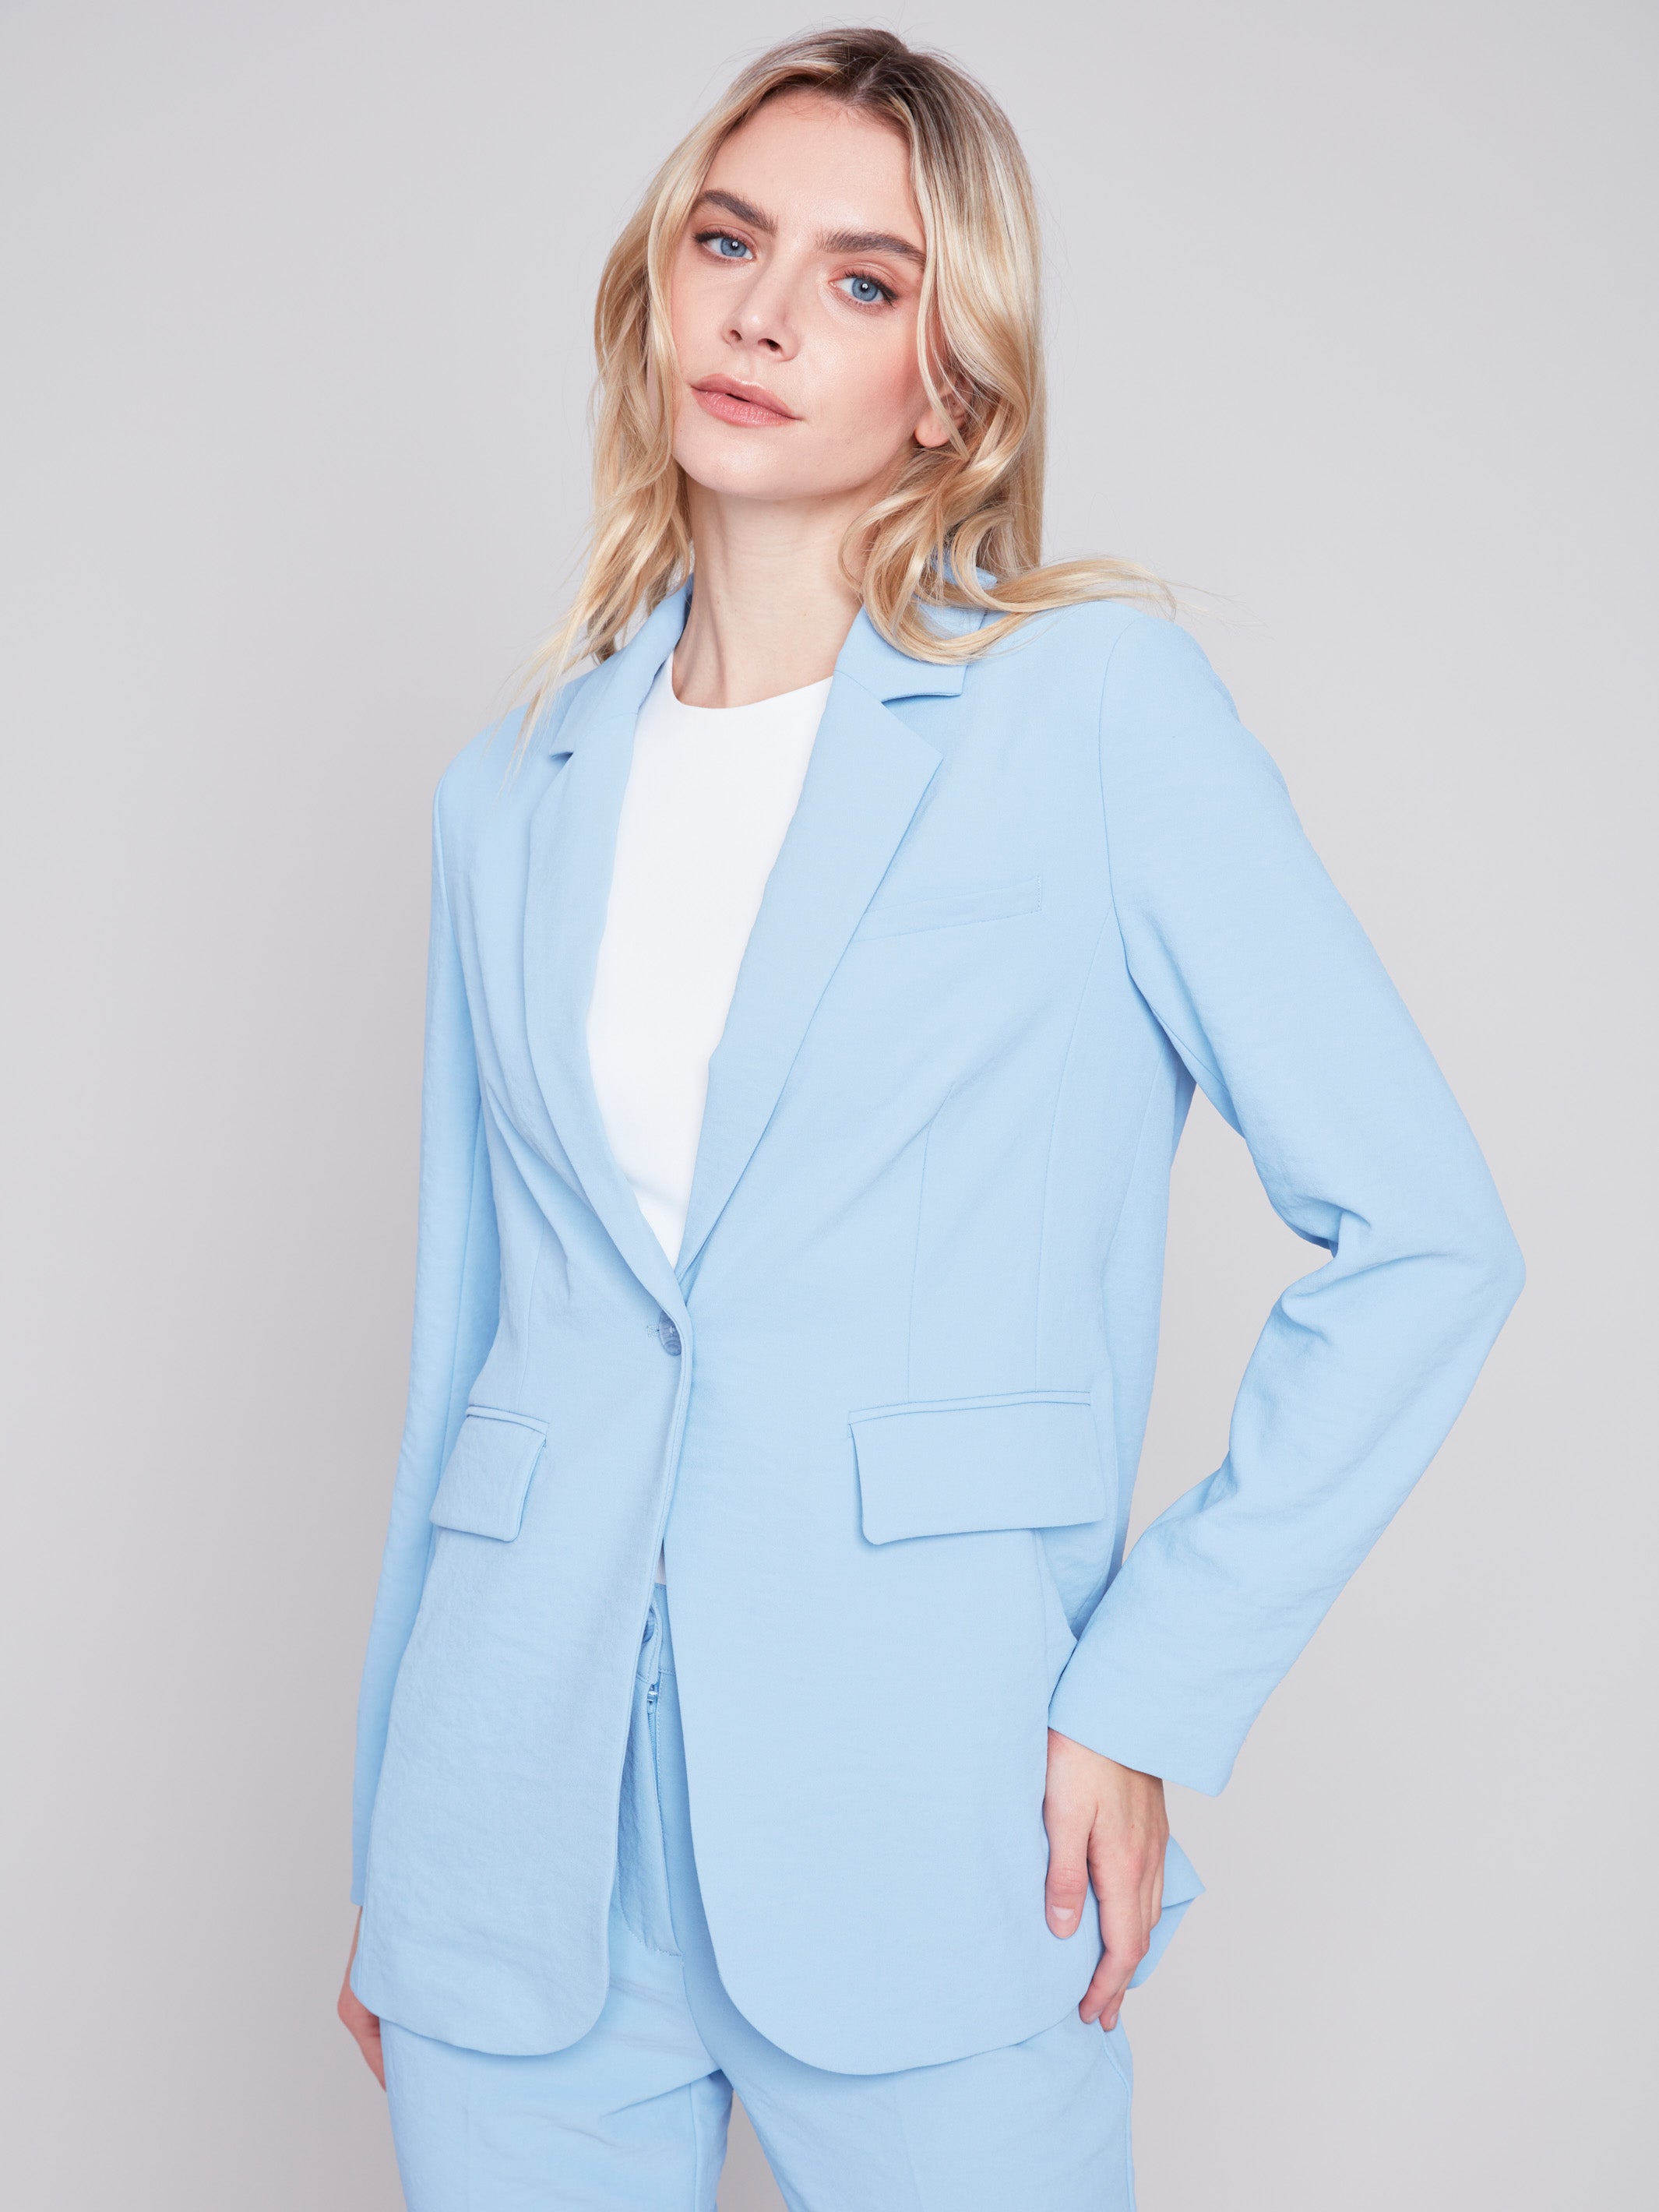 Blazer with Ruched Back - Sky - Charlie B Collection Canada - Image 1